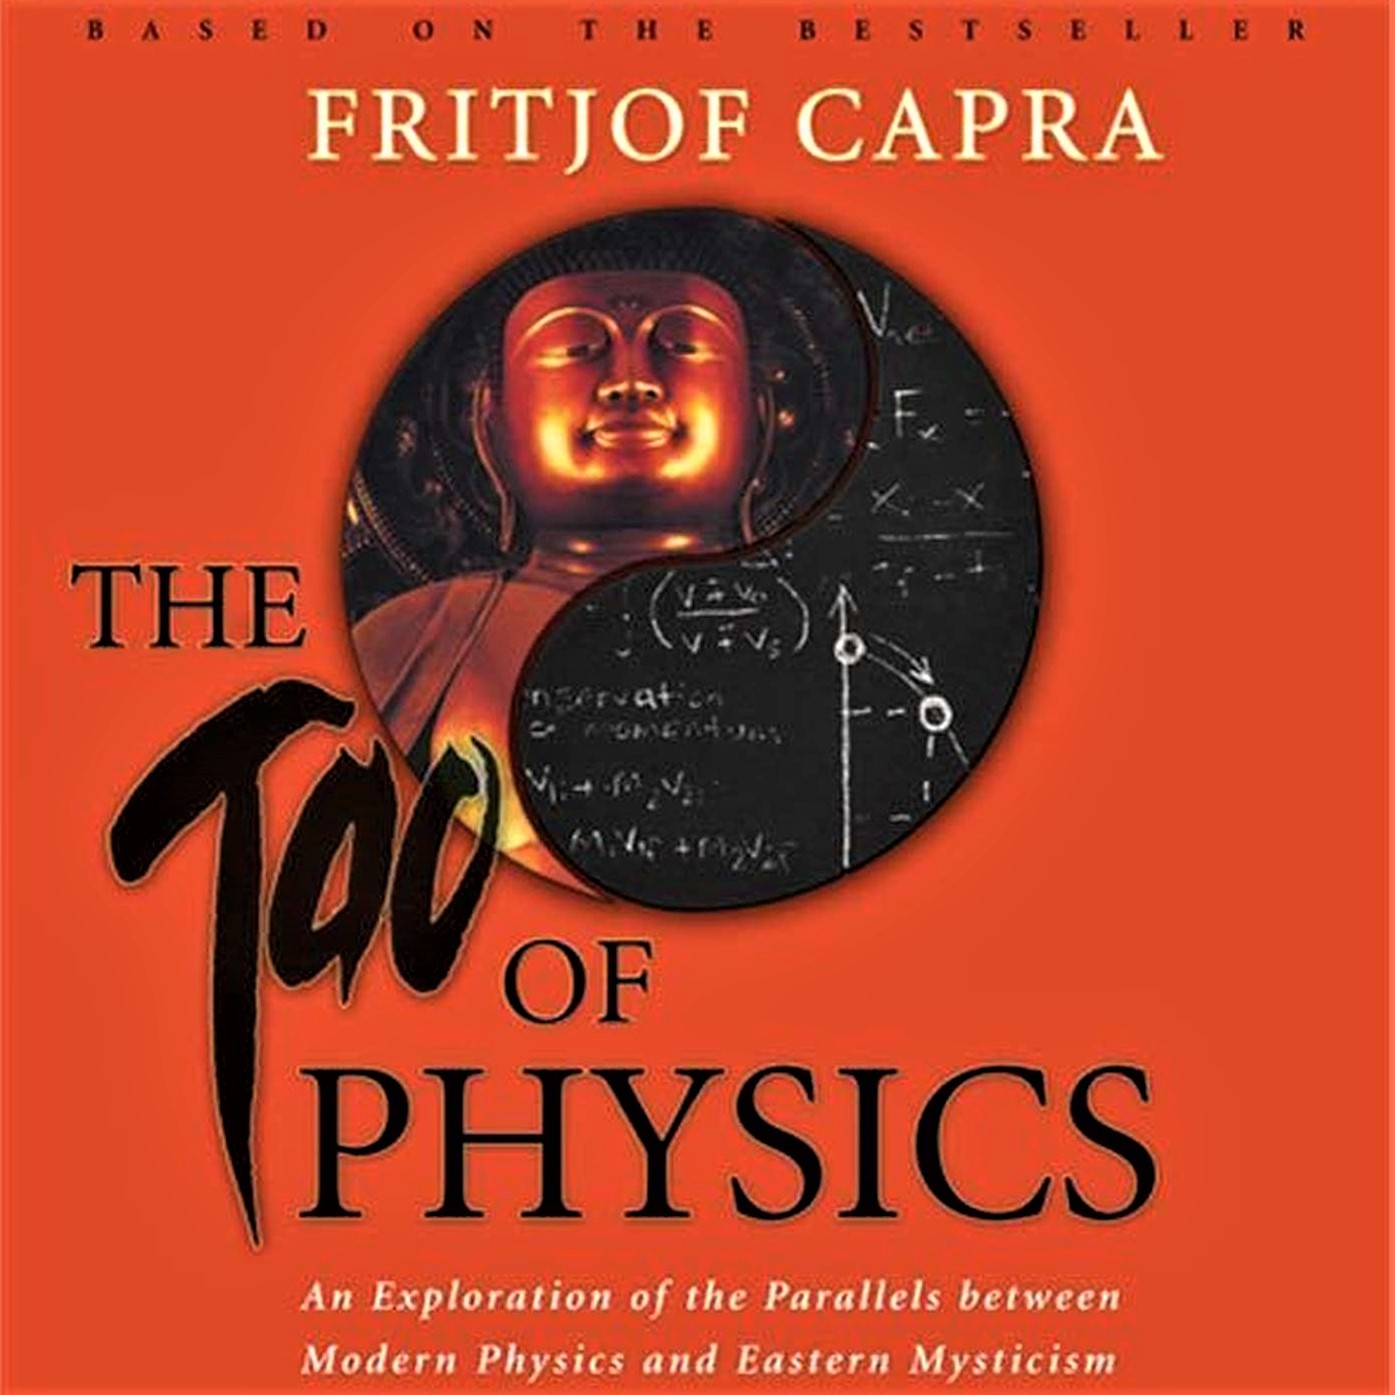 Cover image for Fritjof Capra's 'The Tao of Physics'